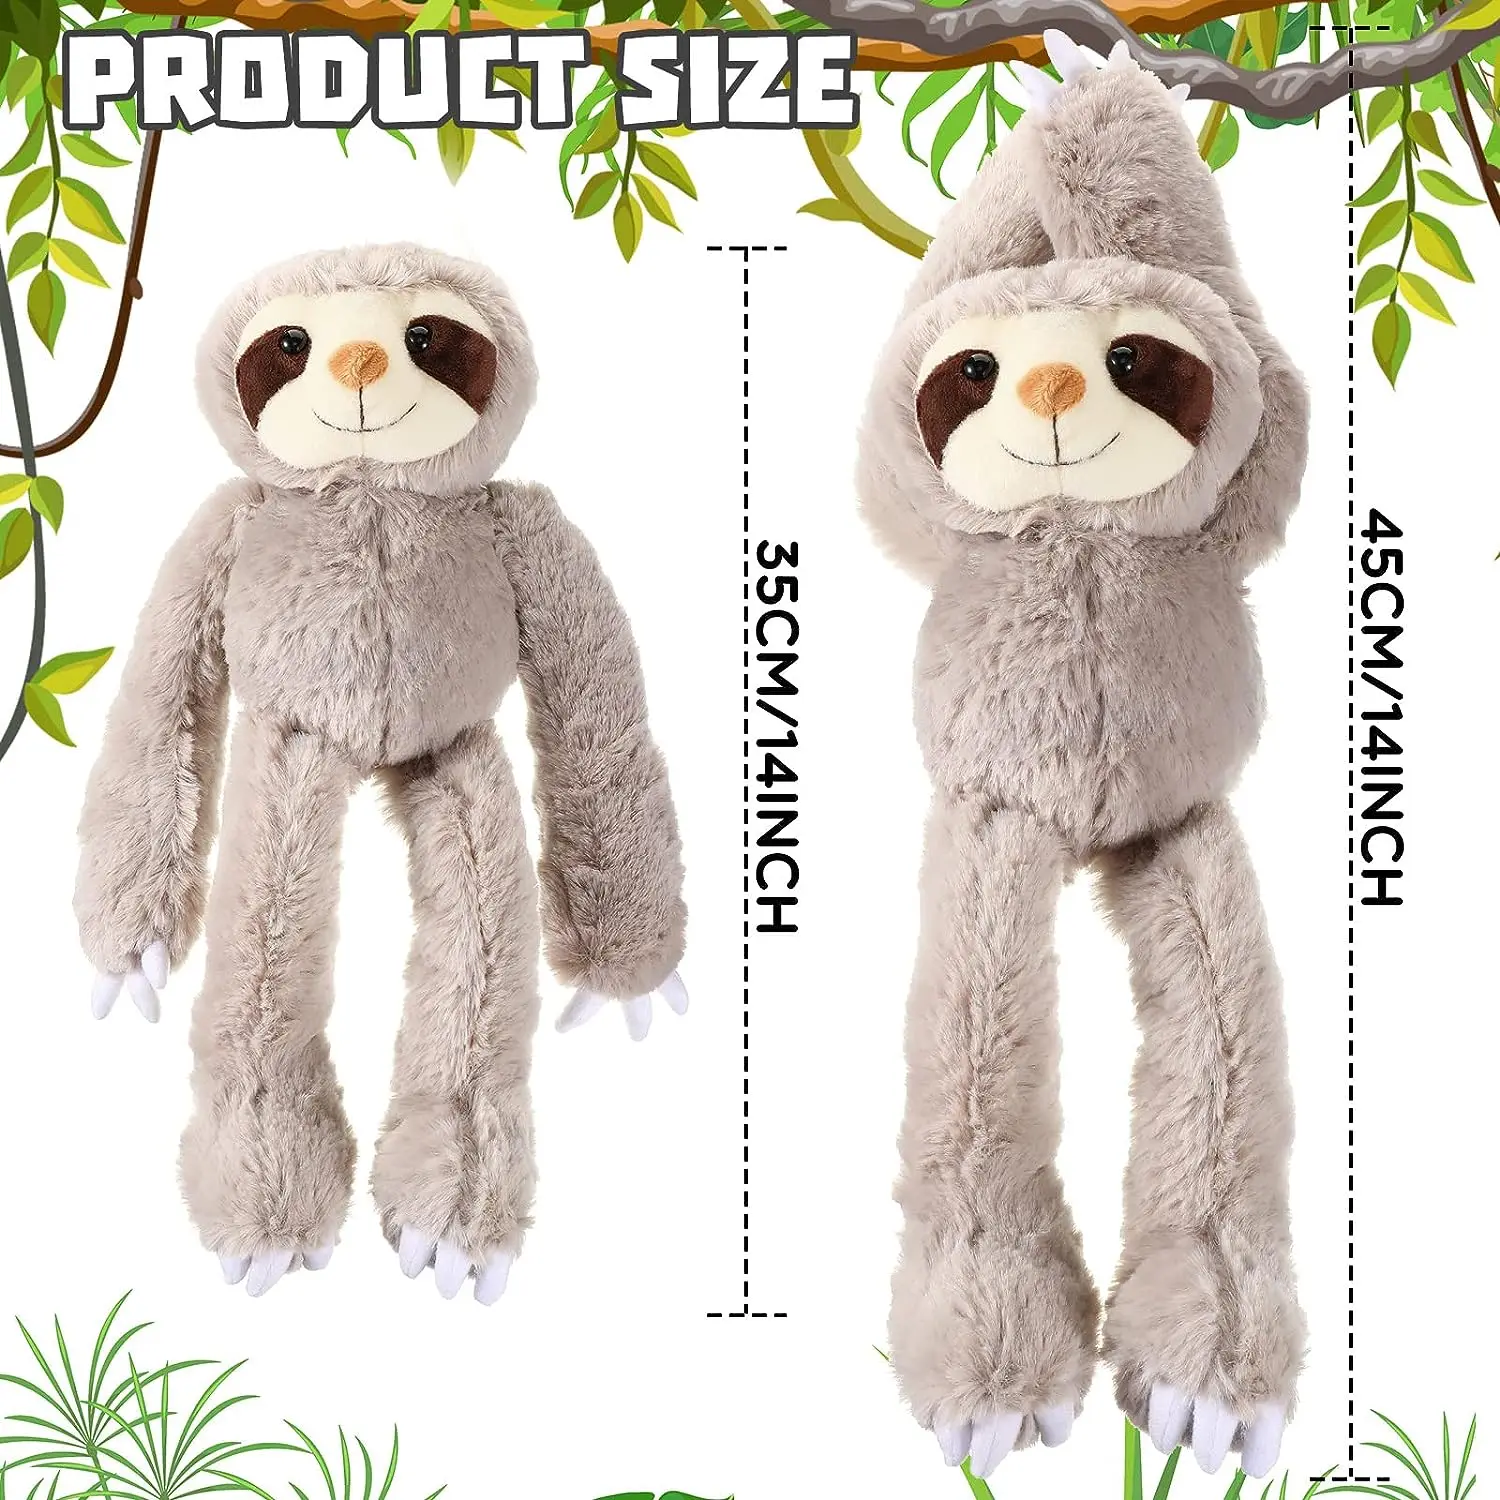 Hanging Sloth Stuffed Animals | 14 Inch Sloth Plush Toy With Hook And Loop Hands -9